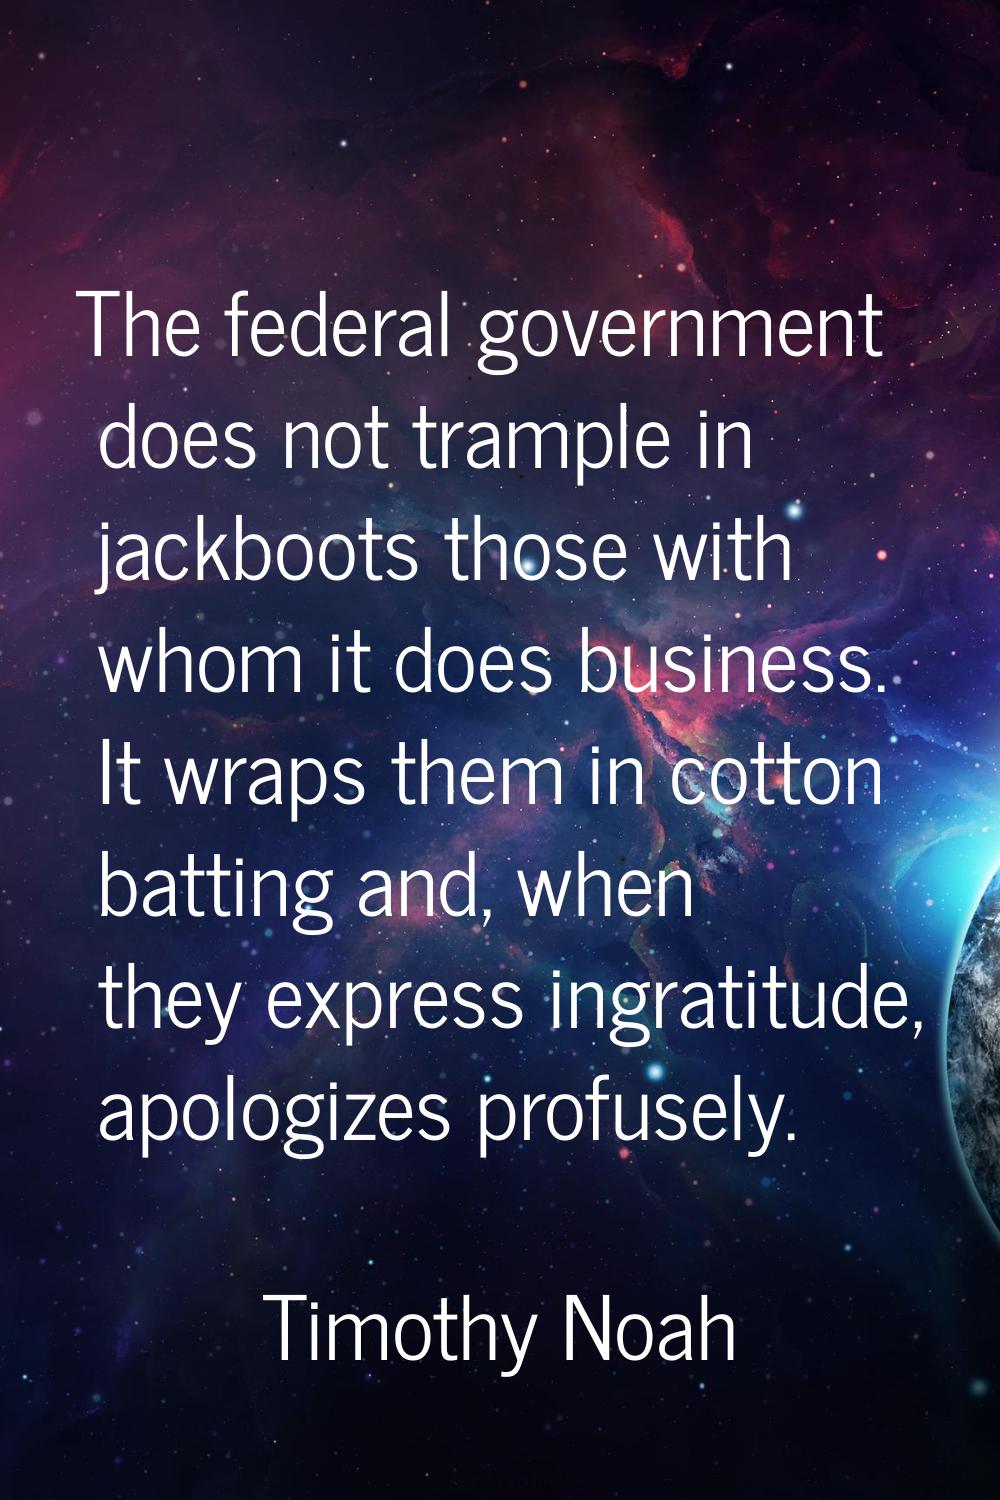 The federal government does not trample in jackboots those with whom it does business. It wraps the